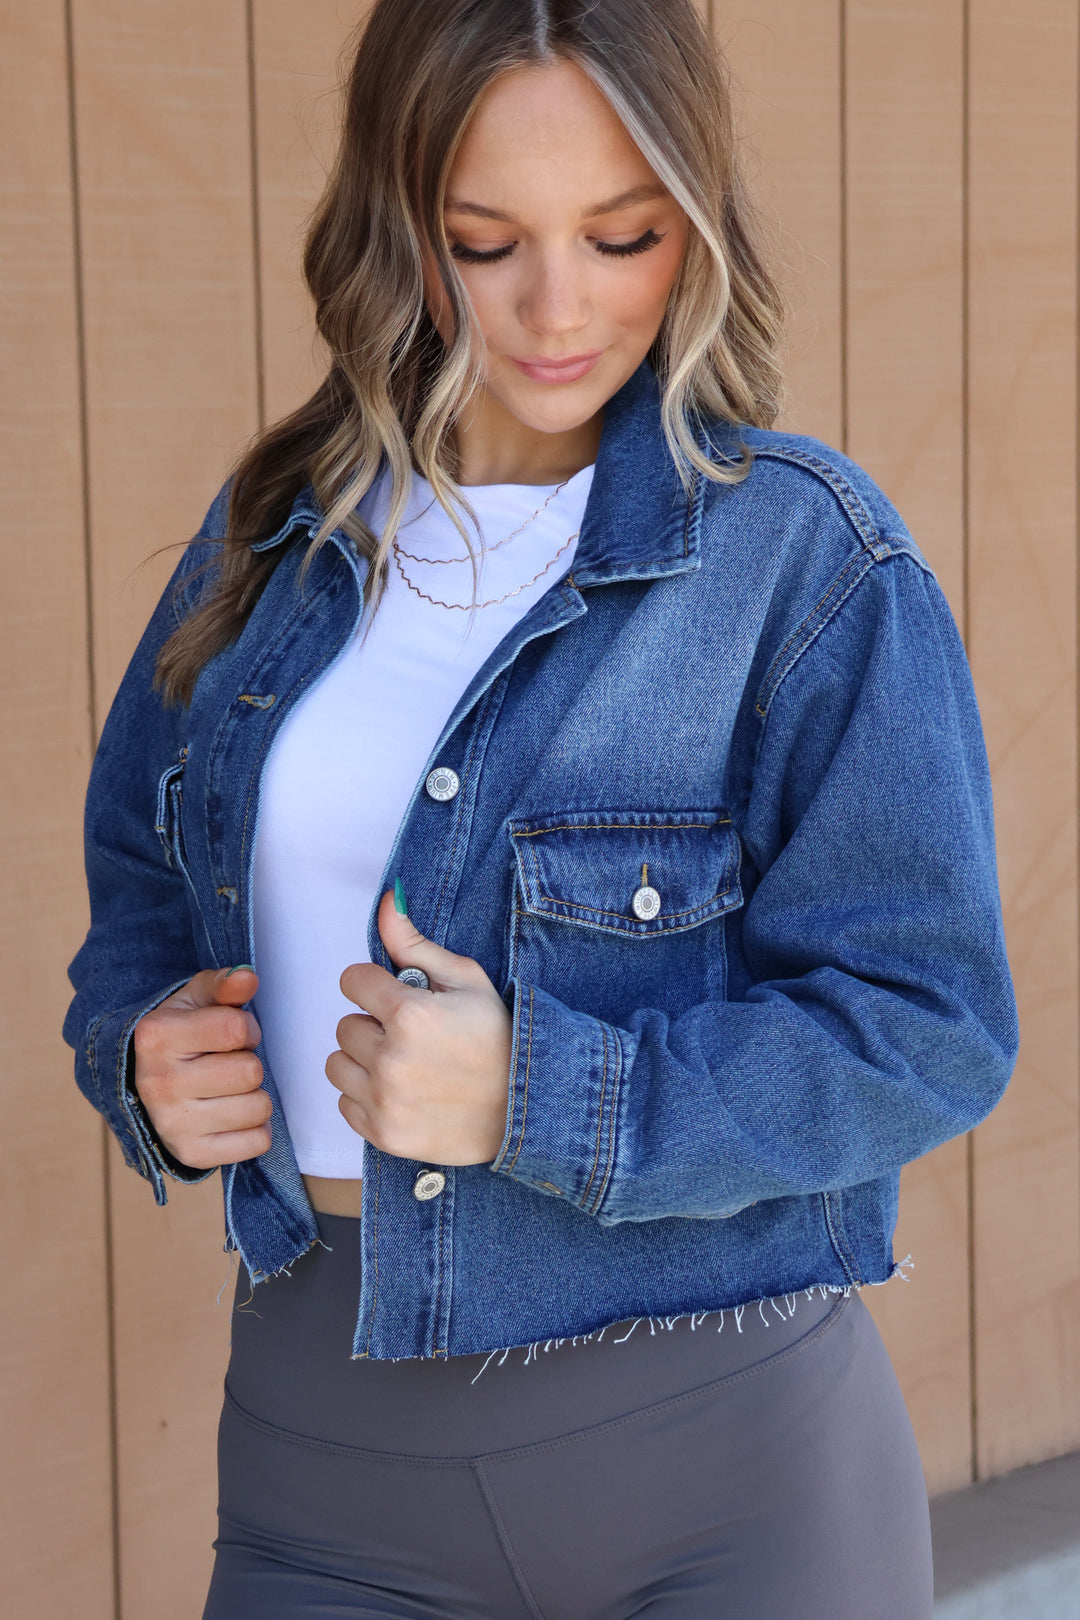 New To Town Denim Jacket - ShopSpoiled